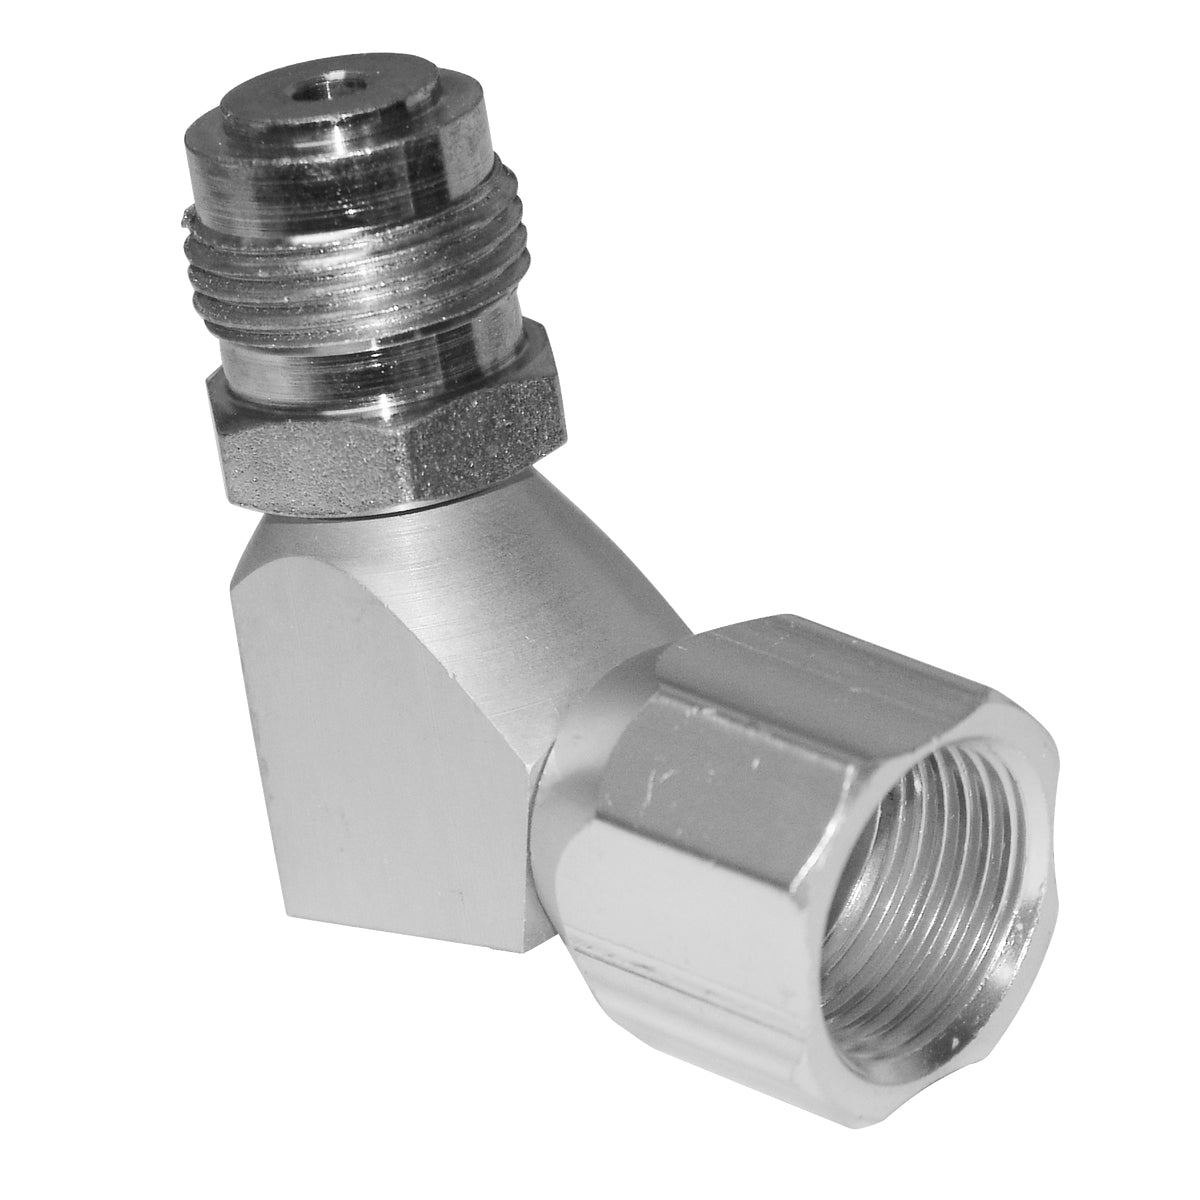 Wagner Angle Adapter - For Use With Spray Poles When Rolling